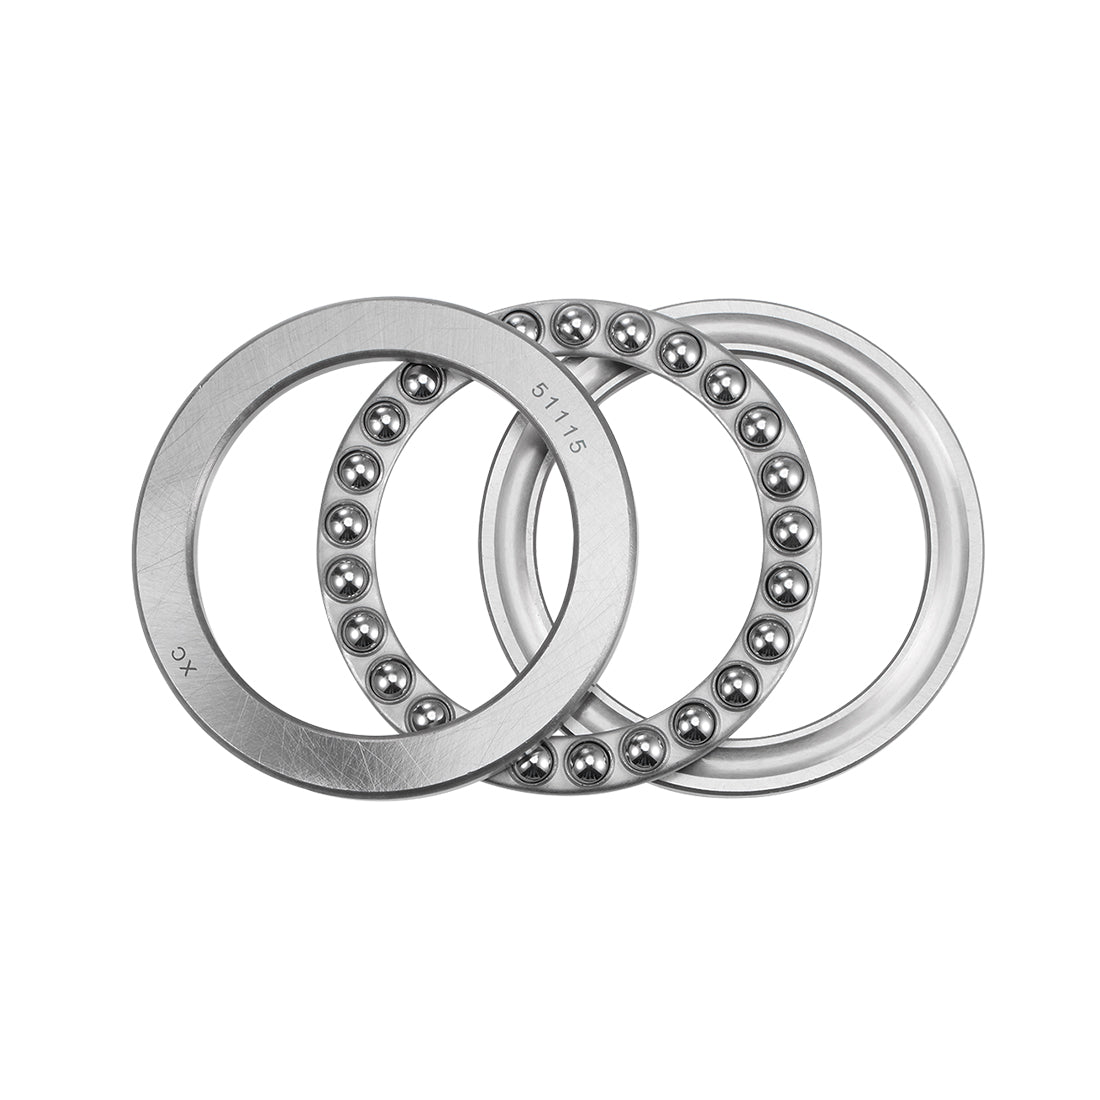 uxcell Uxcell 51115 Miniature Thrust Ball Bearing 75x100x19mm Chrome Steel with Washer